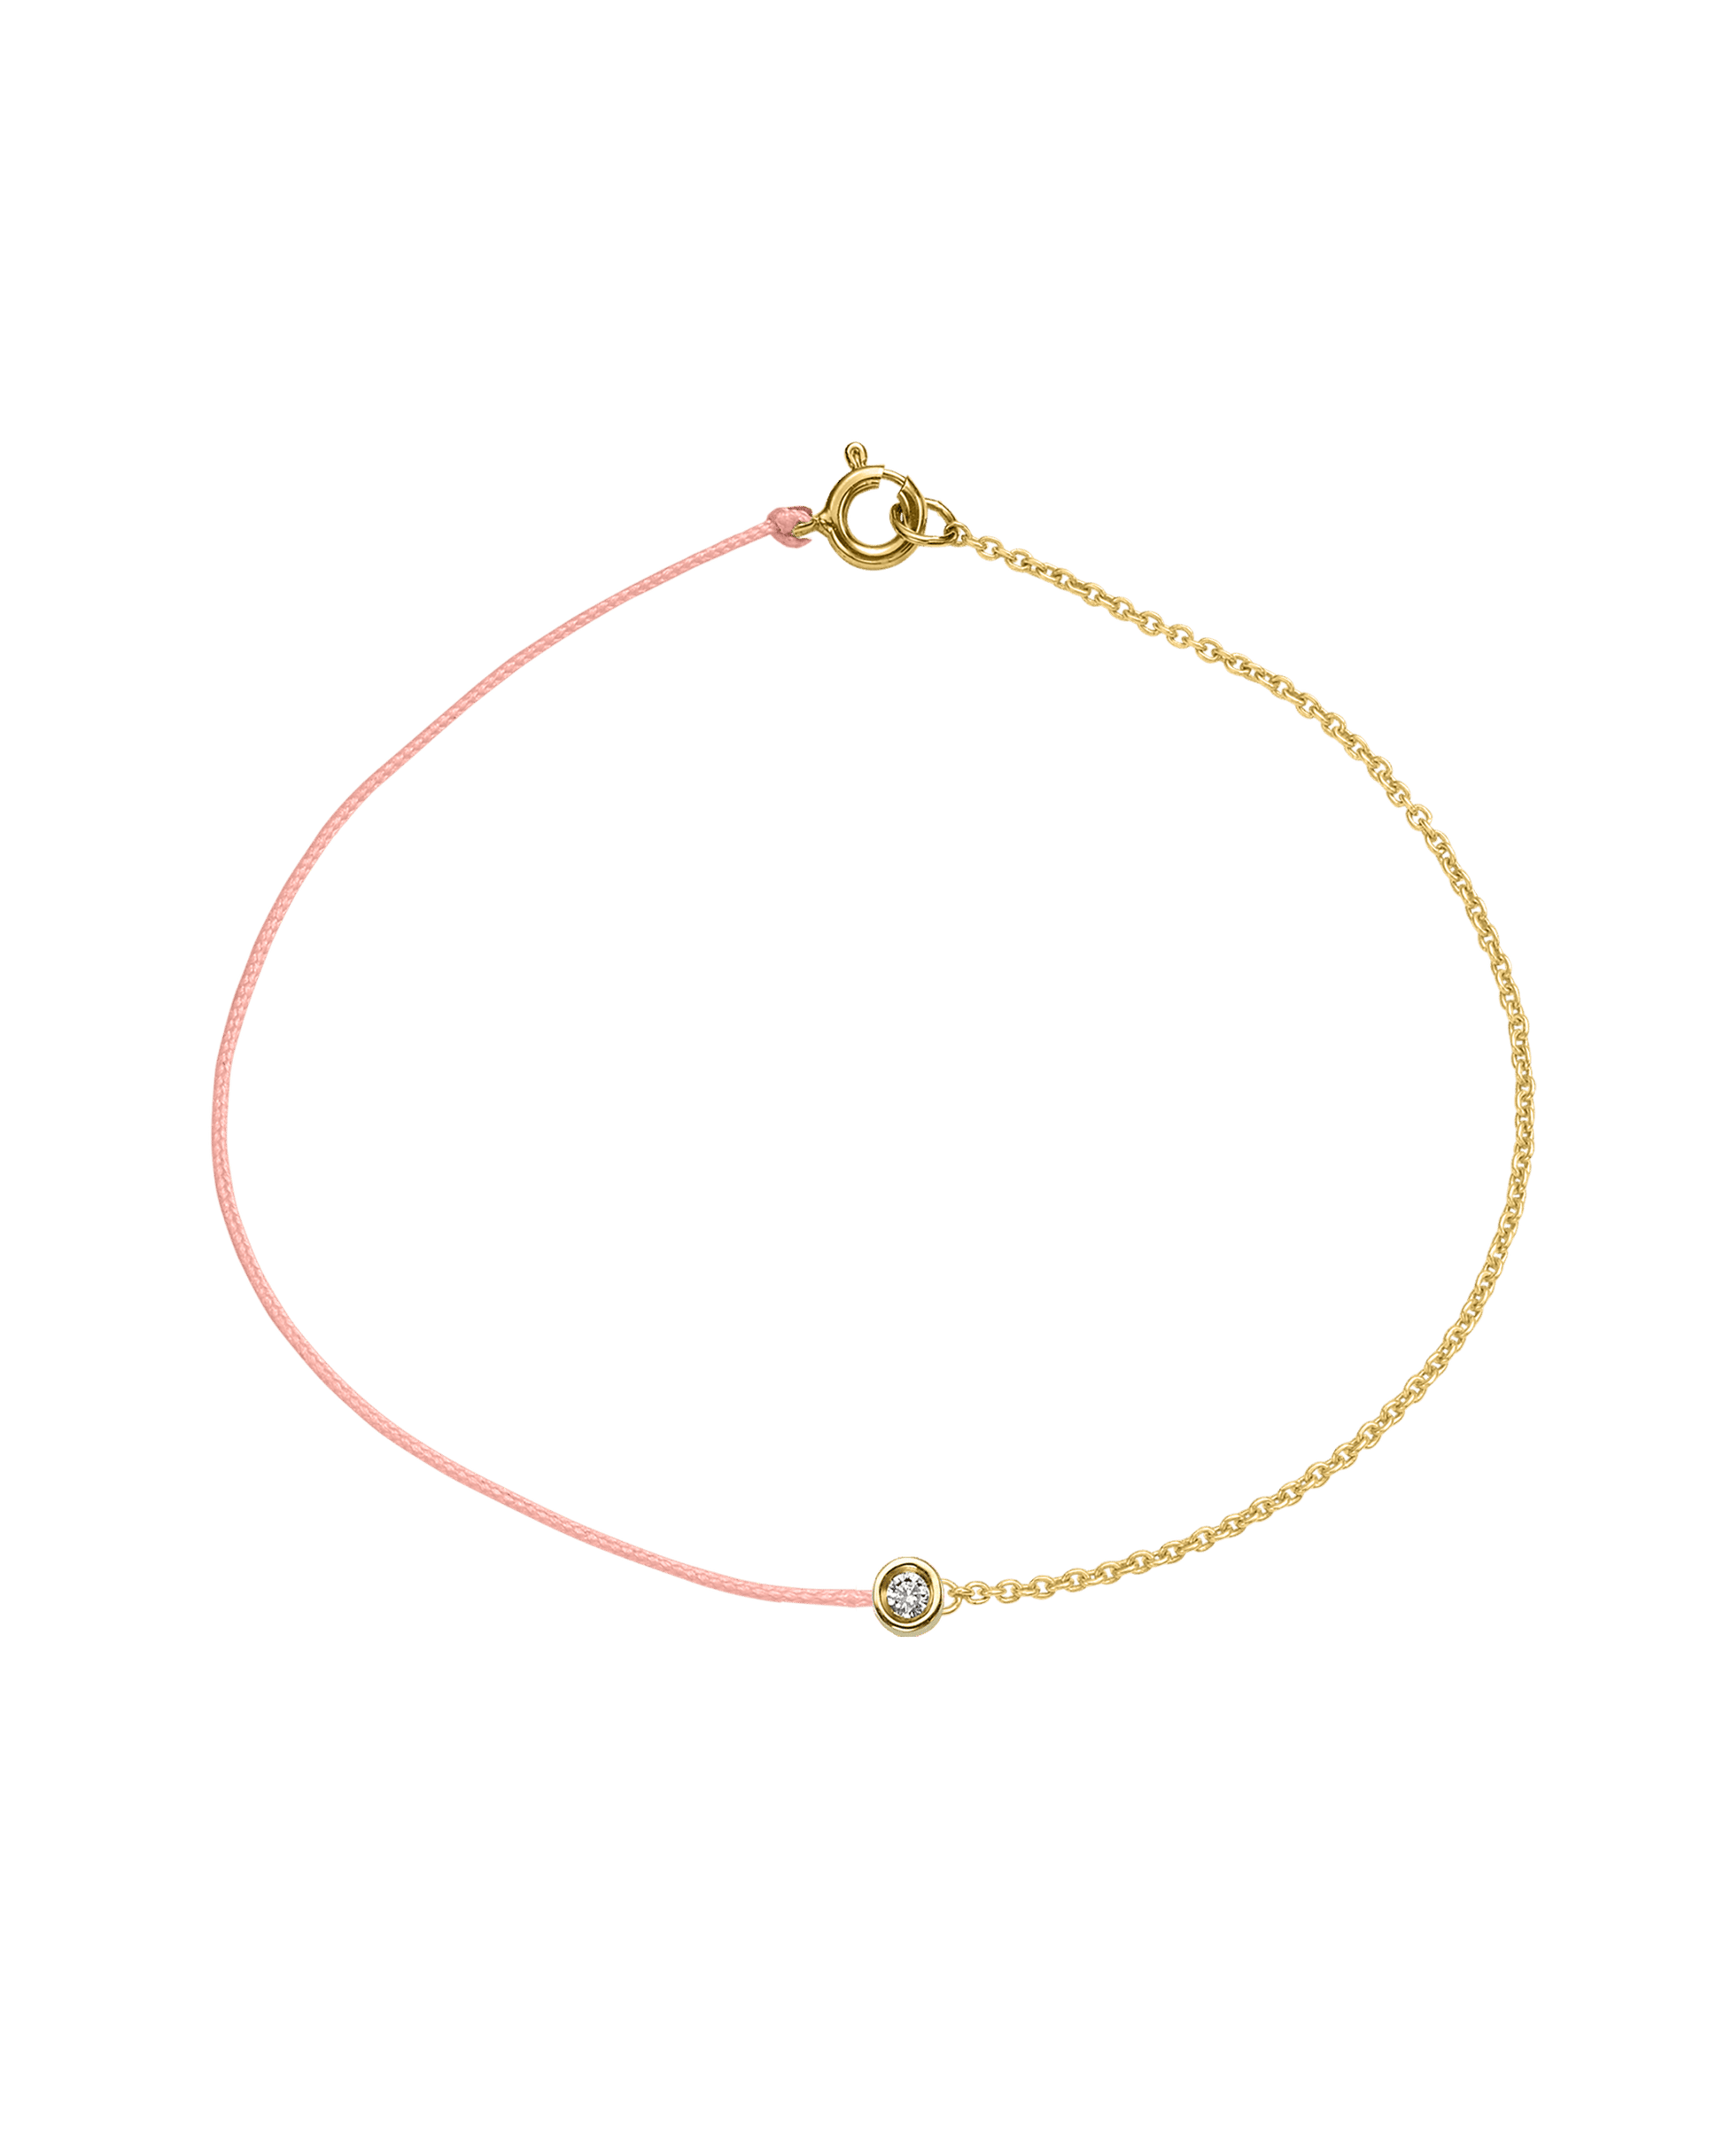 Pink : The Half Chain String of Love - 14K Yellow Gold Bracelet 14K Solid Gold Flamingo Small: 0.03ct Small 6 Inches